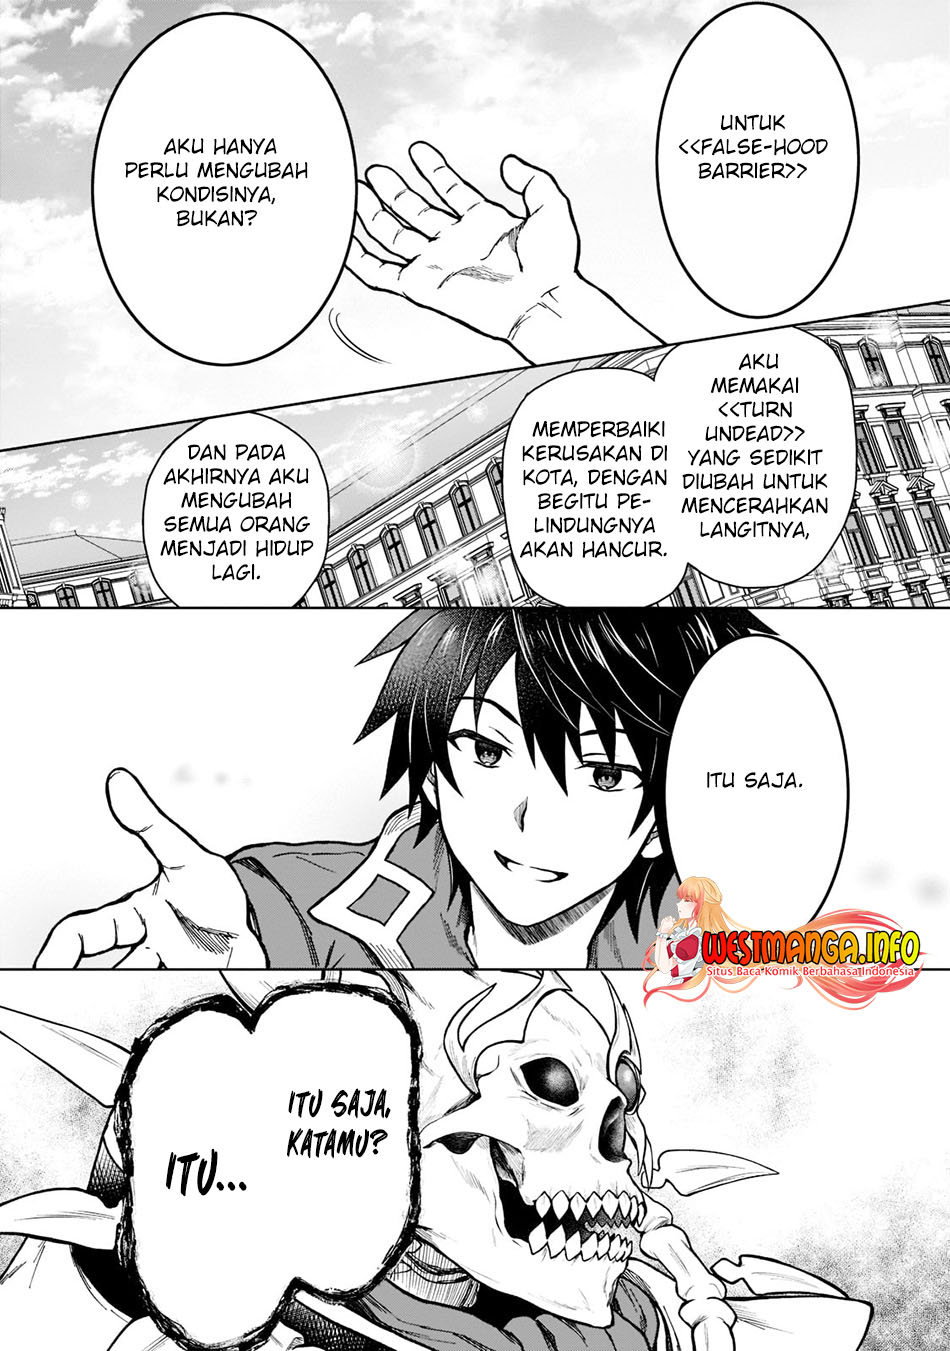 Dilarang COPAS - situs resmi www.mangacanblog.com - Komik d rank adventurer invited by a brave party and the stalking princess 011 - chapter 11 12 Indonesia d rank adventurer invited by a brave party and the stalking princess 011 - chapter 11 Terbaru 18|Baca Manga Komik Indonesia|Mangacan